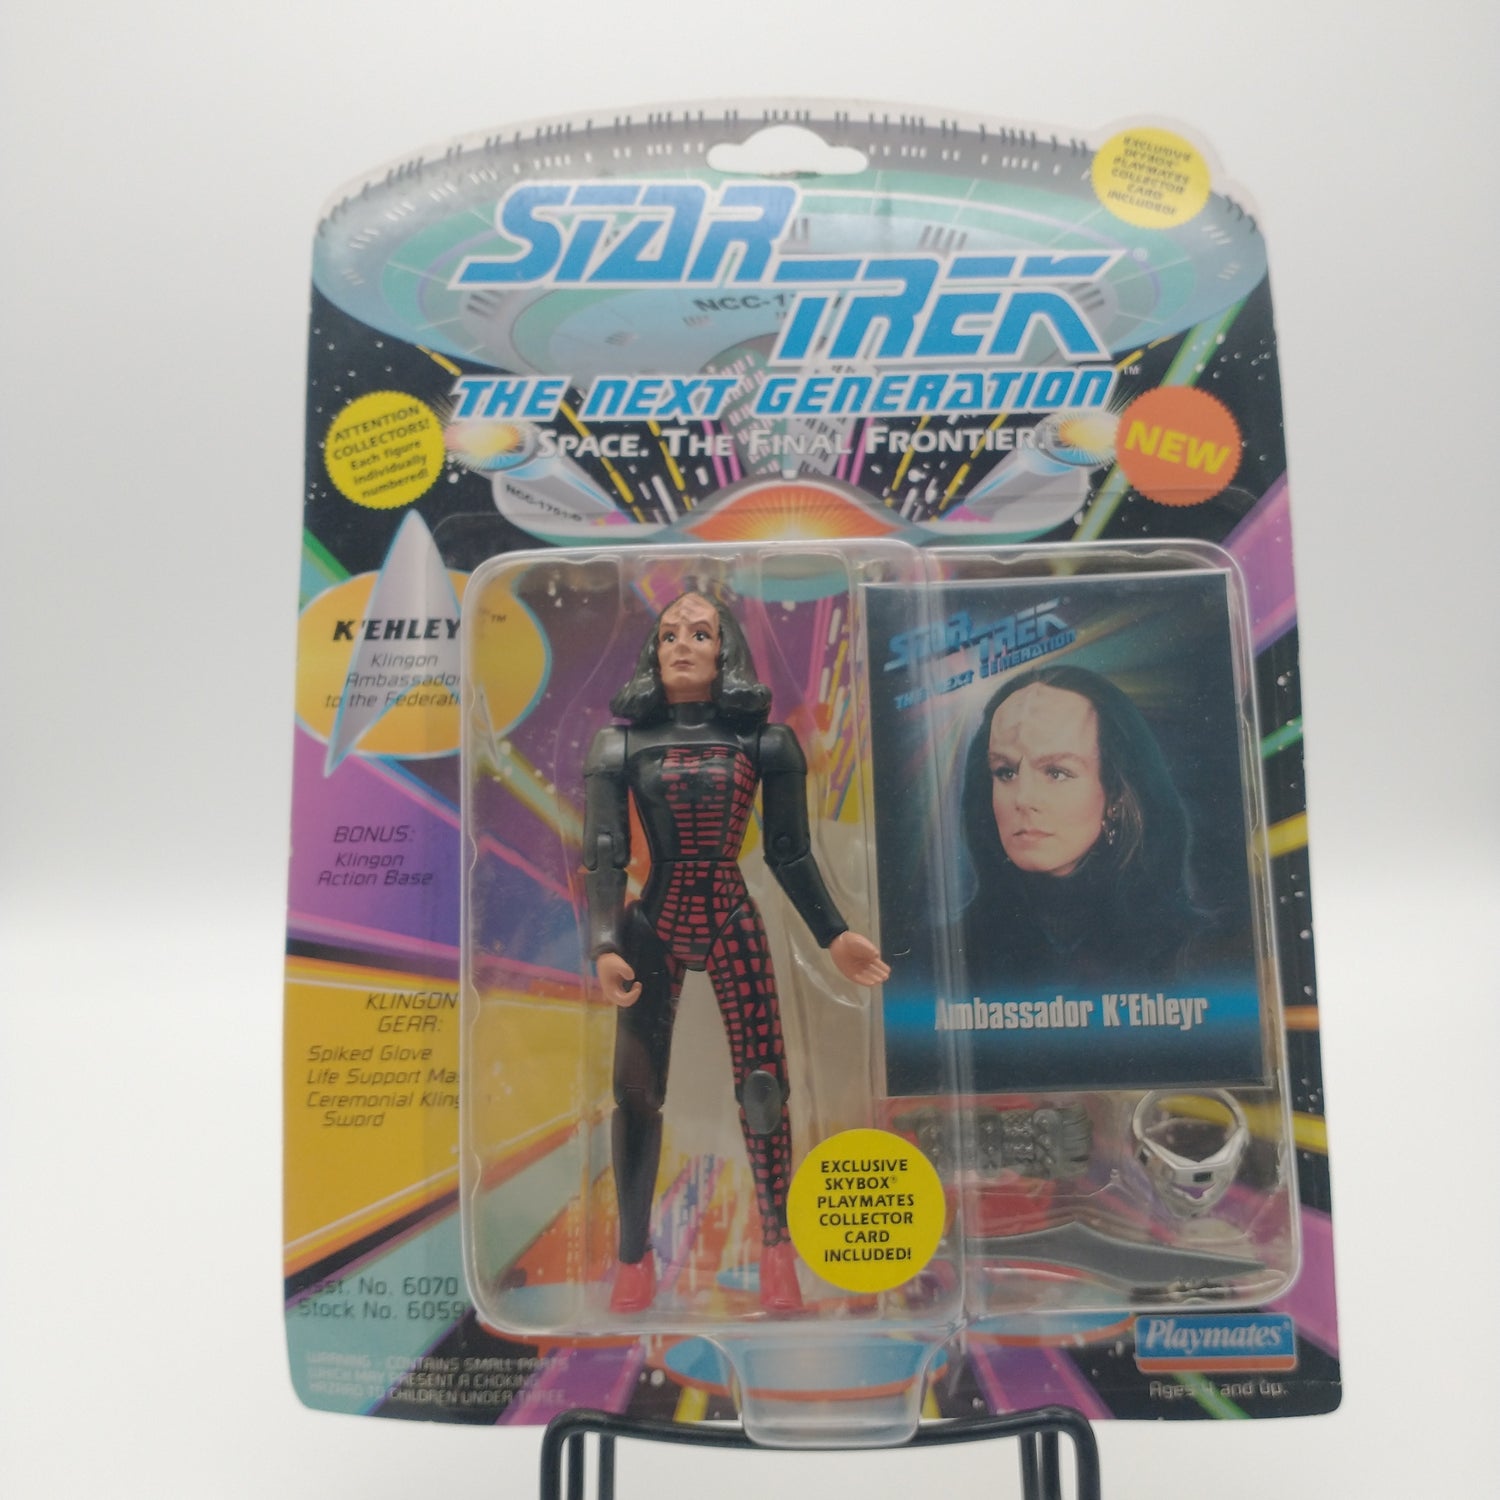 The front of the box and bubble. The bubble is sealed, the action figure inside is wearing a black skin-tight suit she has black hair and red scales up the side of the leg.